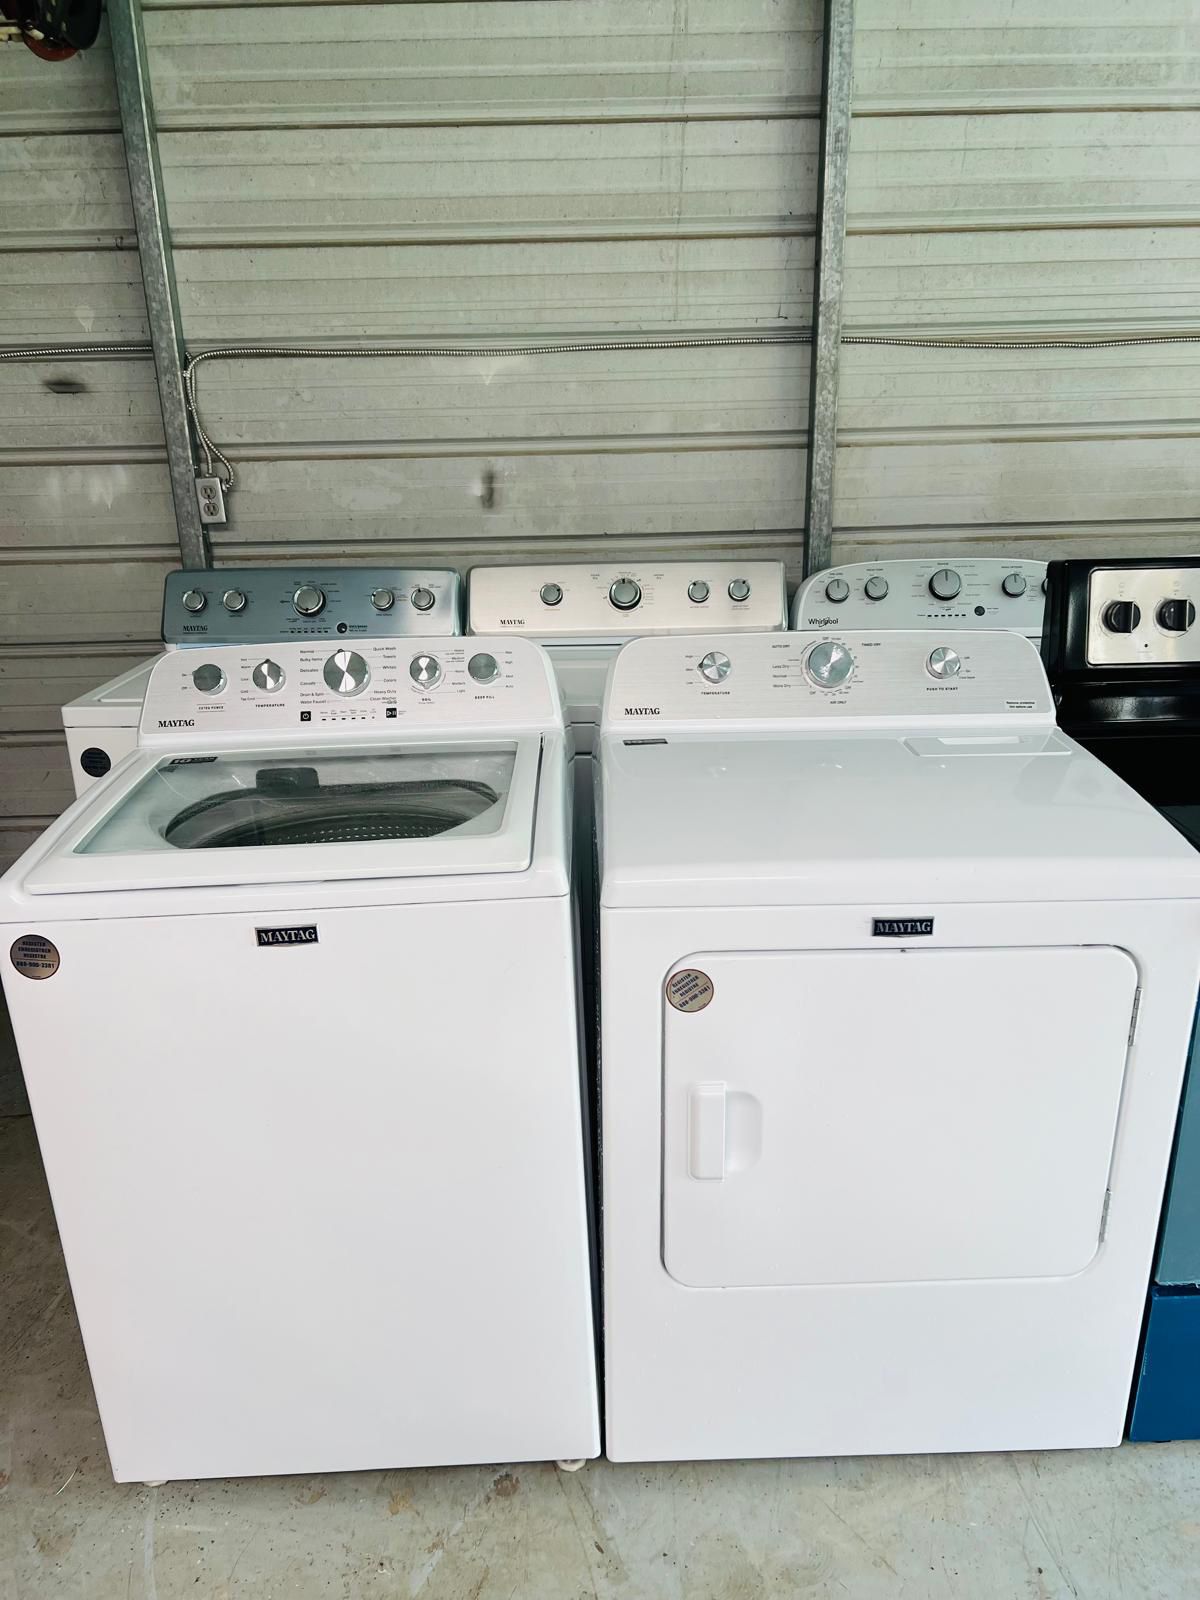 Washer And Dryer Set (Maytag) Top Load 